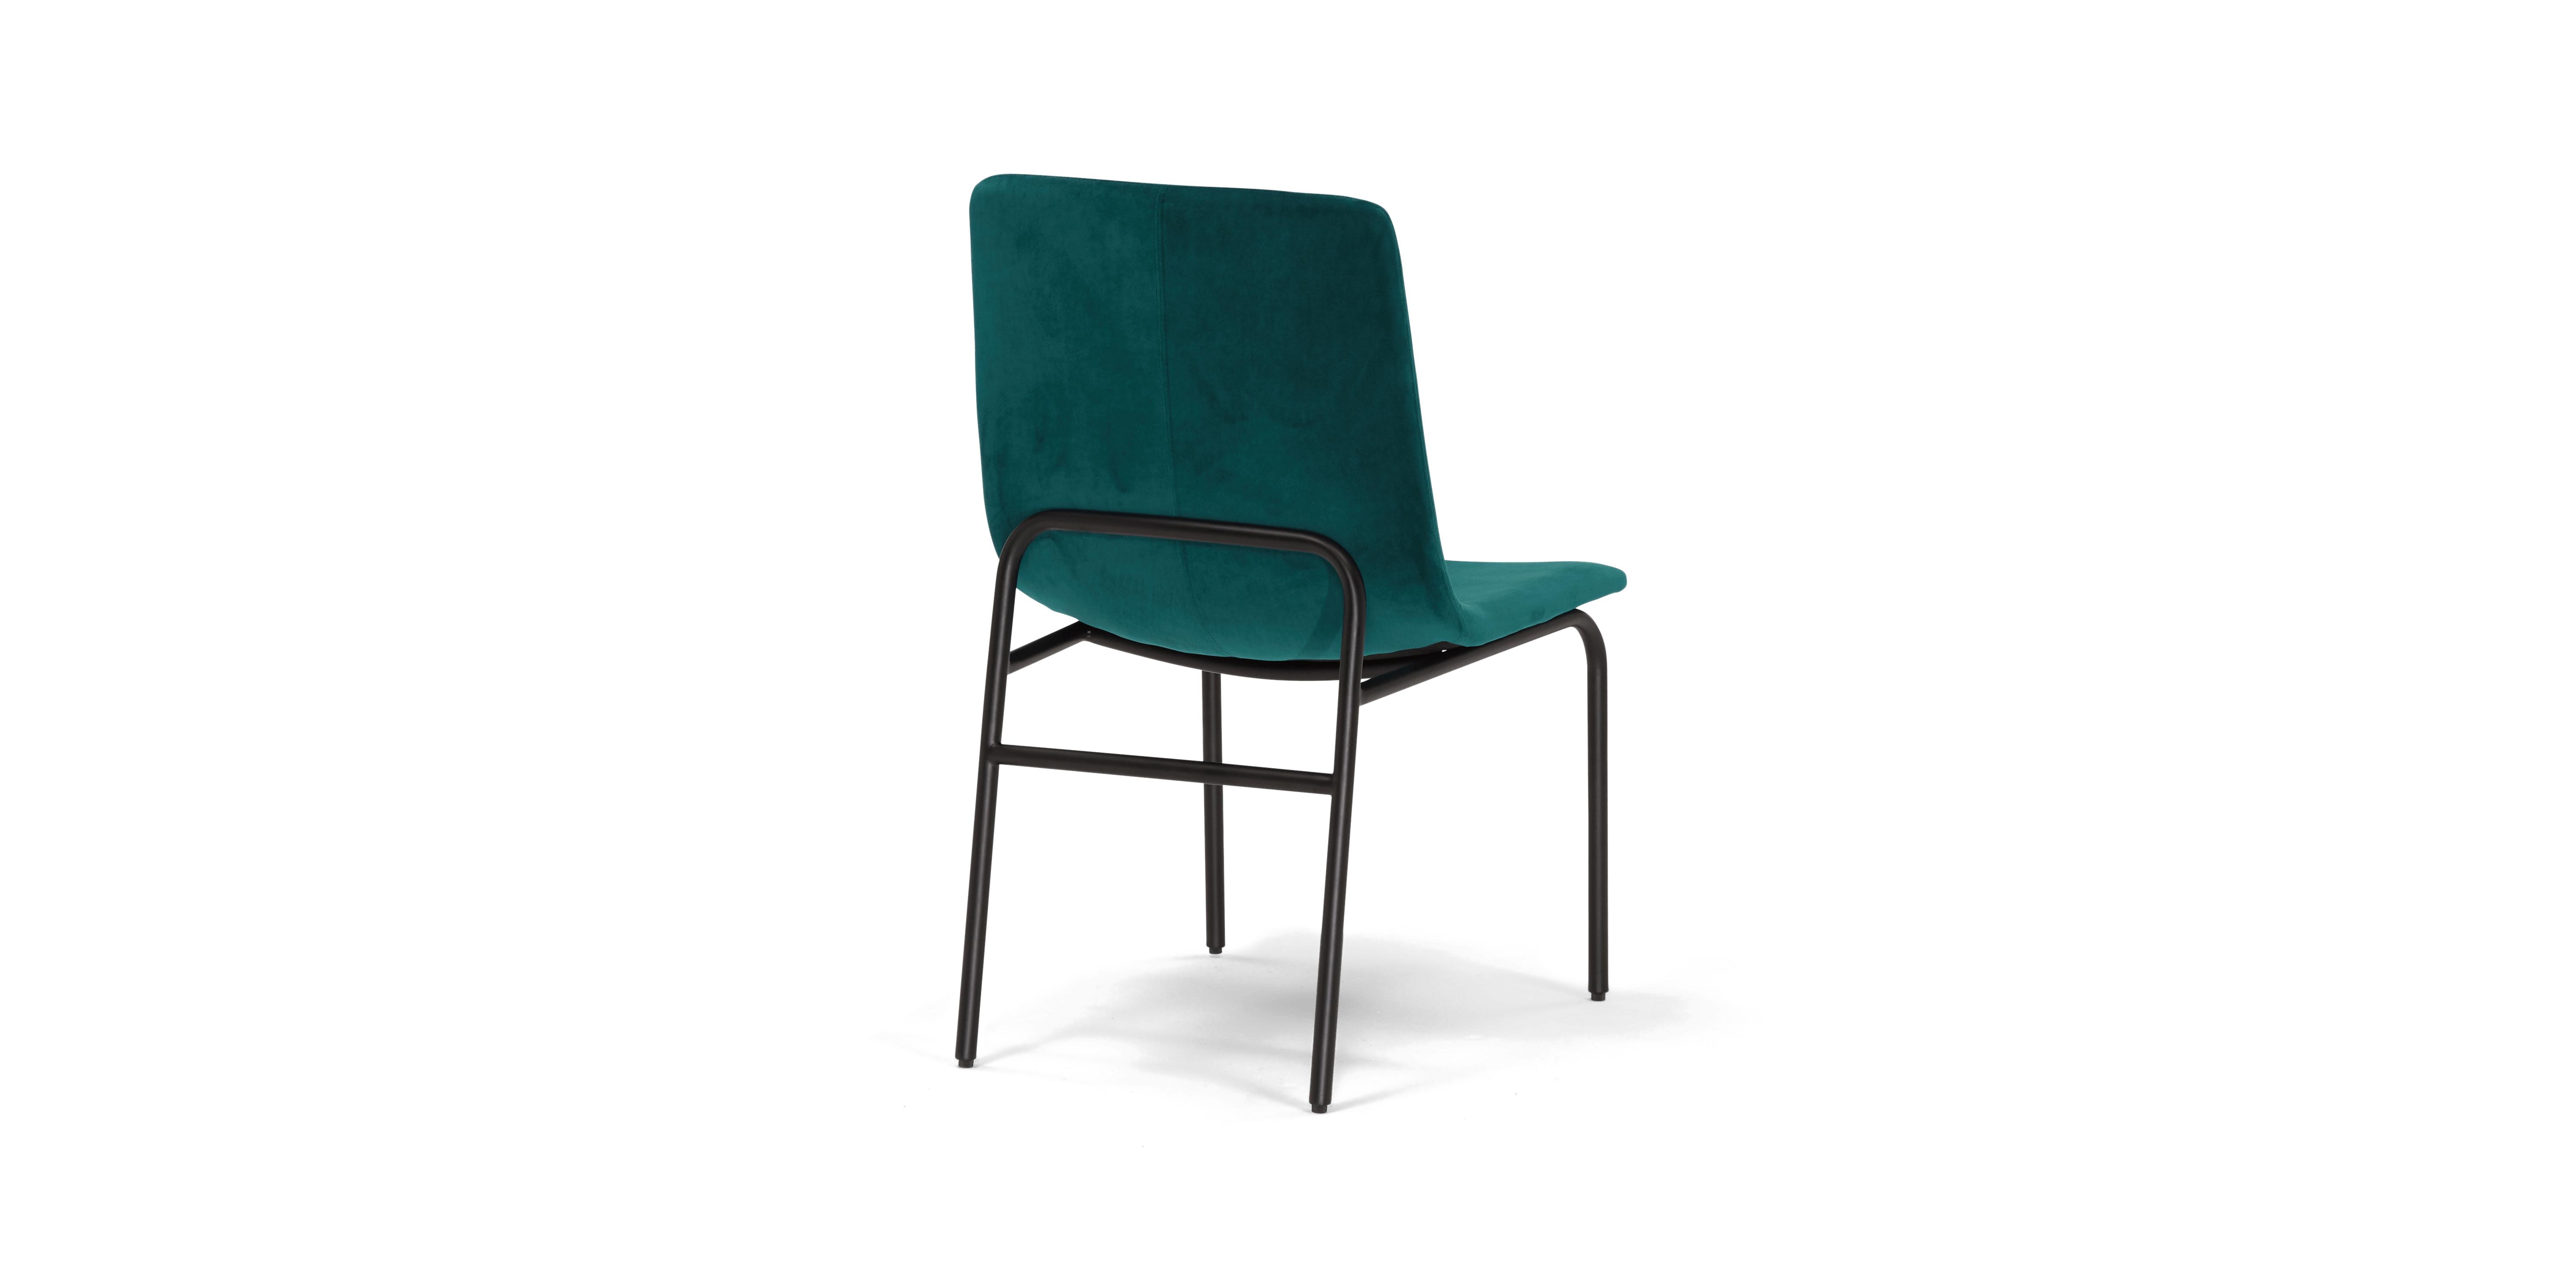 Blue Rae Mid Century Modern Dining Side Chair (Set of 2) - Royale Peacock - Image 3